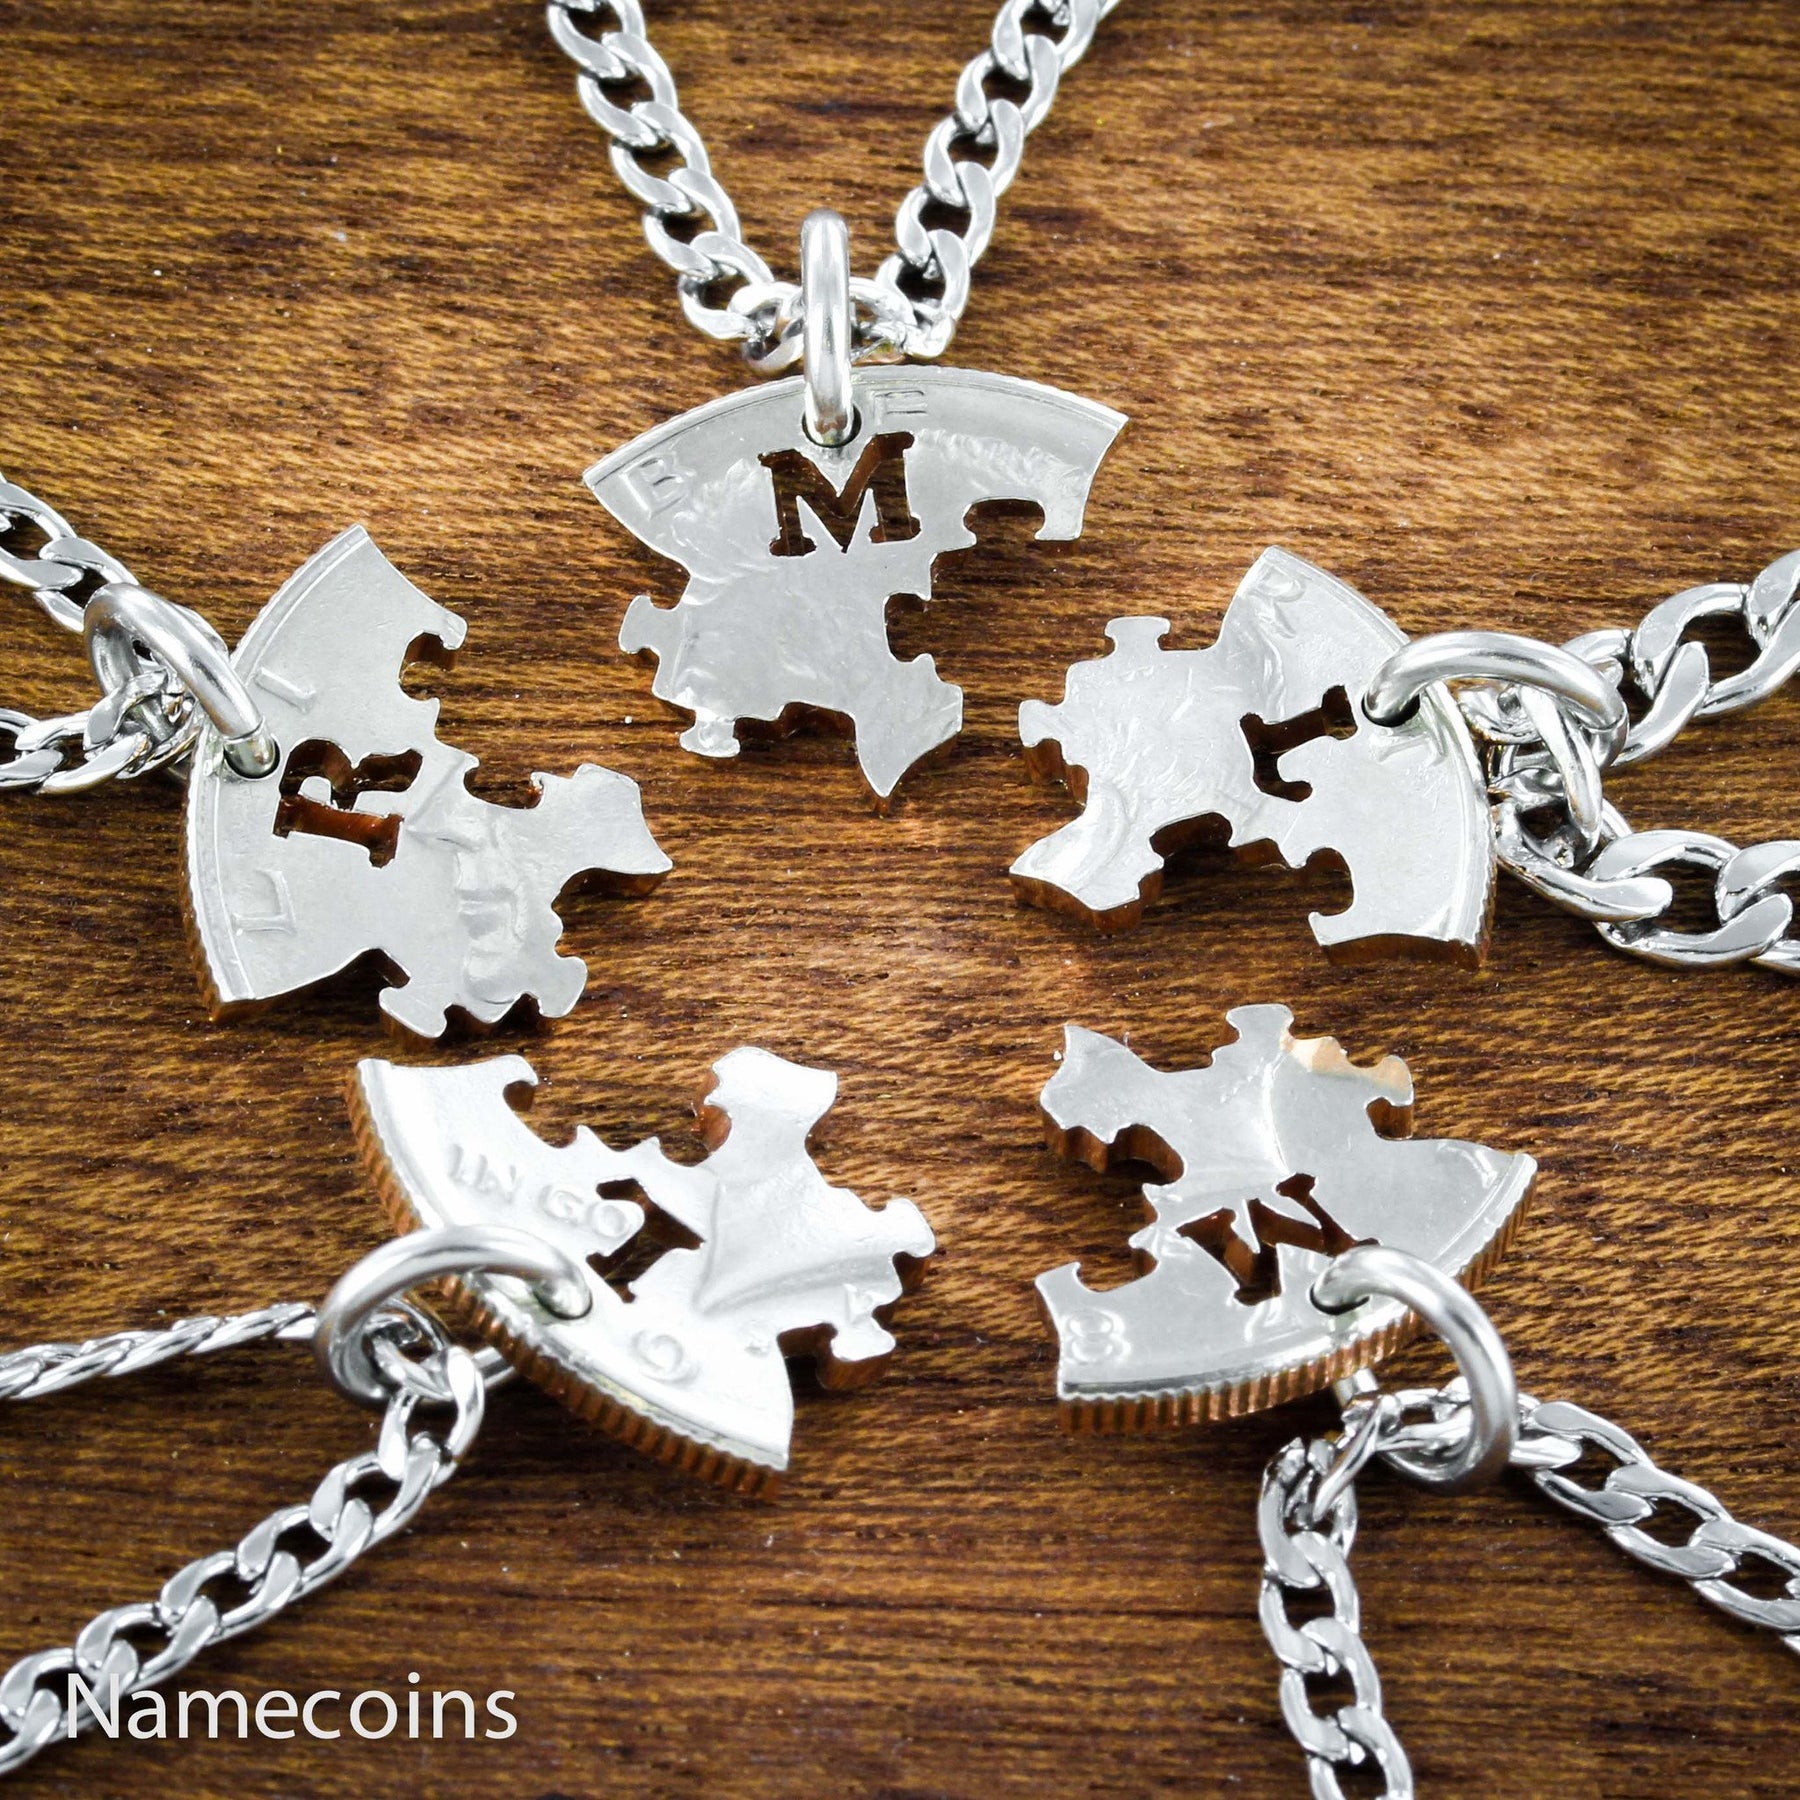 love hands relation set 5 puzzle piece family necklaces hand cut coin